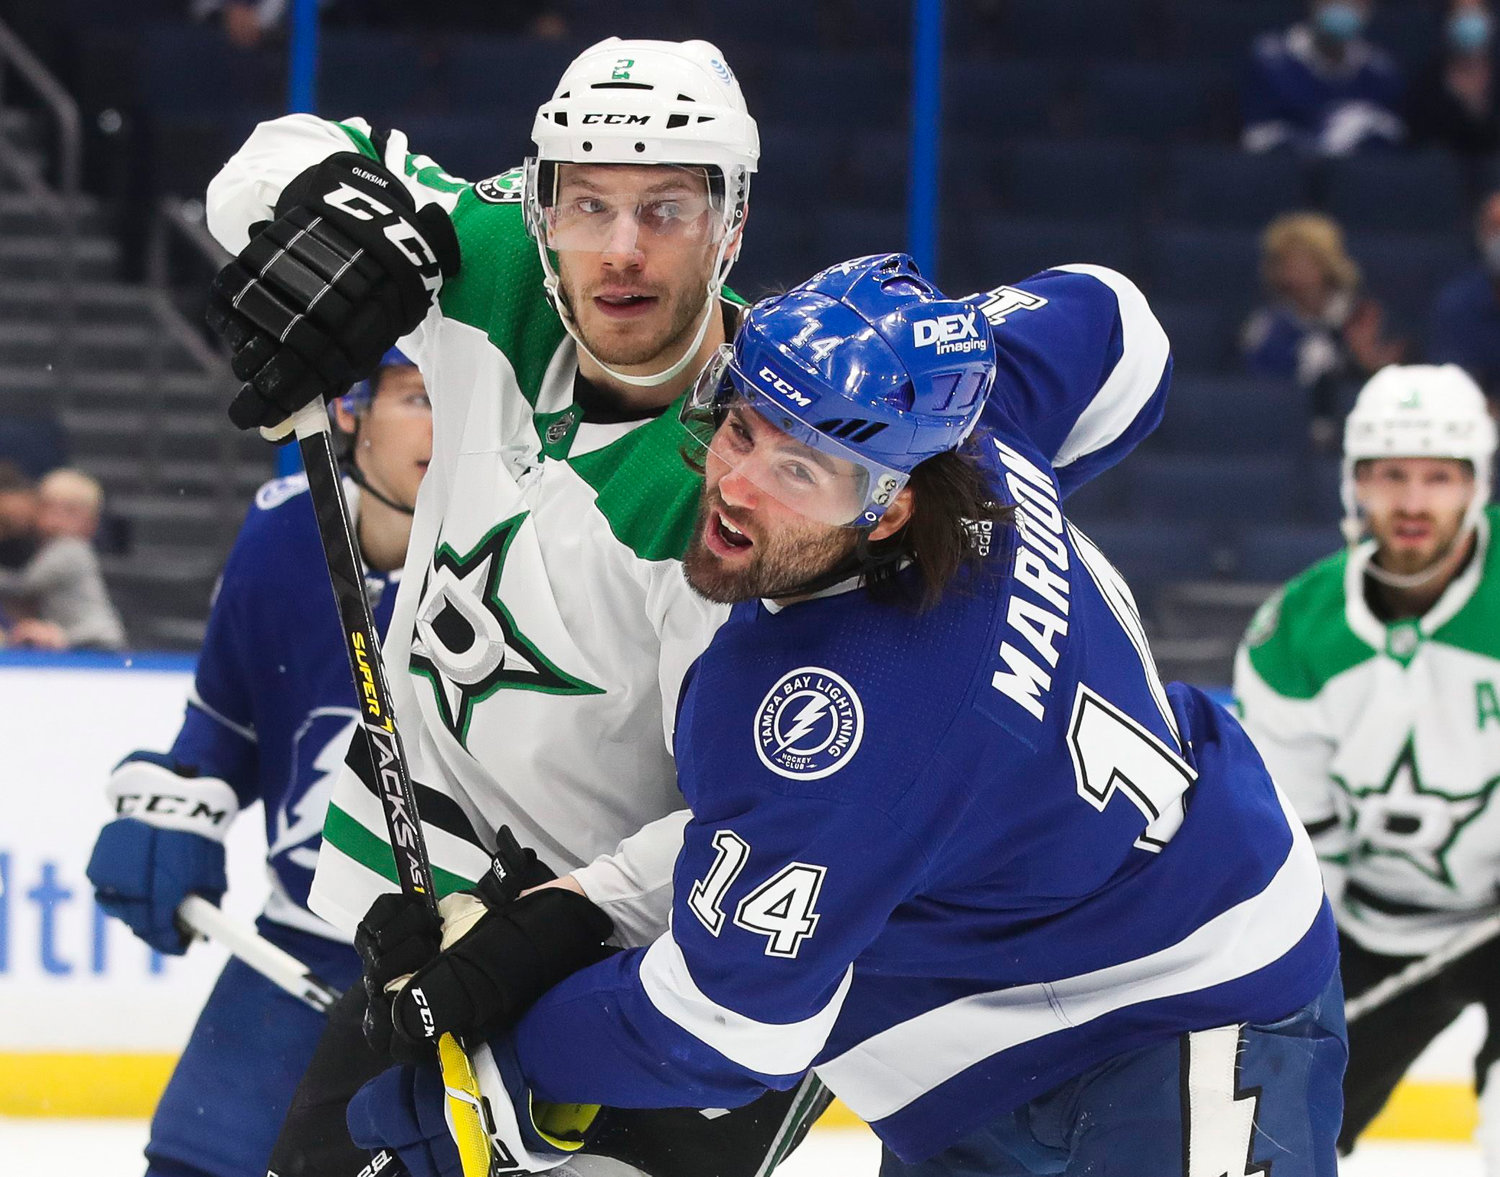 Tampa Bay Lightning left wing Pat Maroon (14) battles Dallas Stars defenseman Jamie Oleksiak (2) for positioning in front of the net during first period action at Amalie Arena on May 5, 2021 in Tampa.